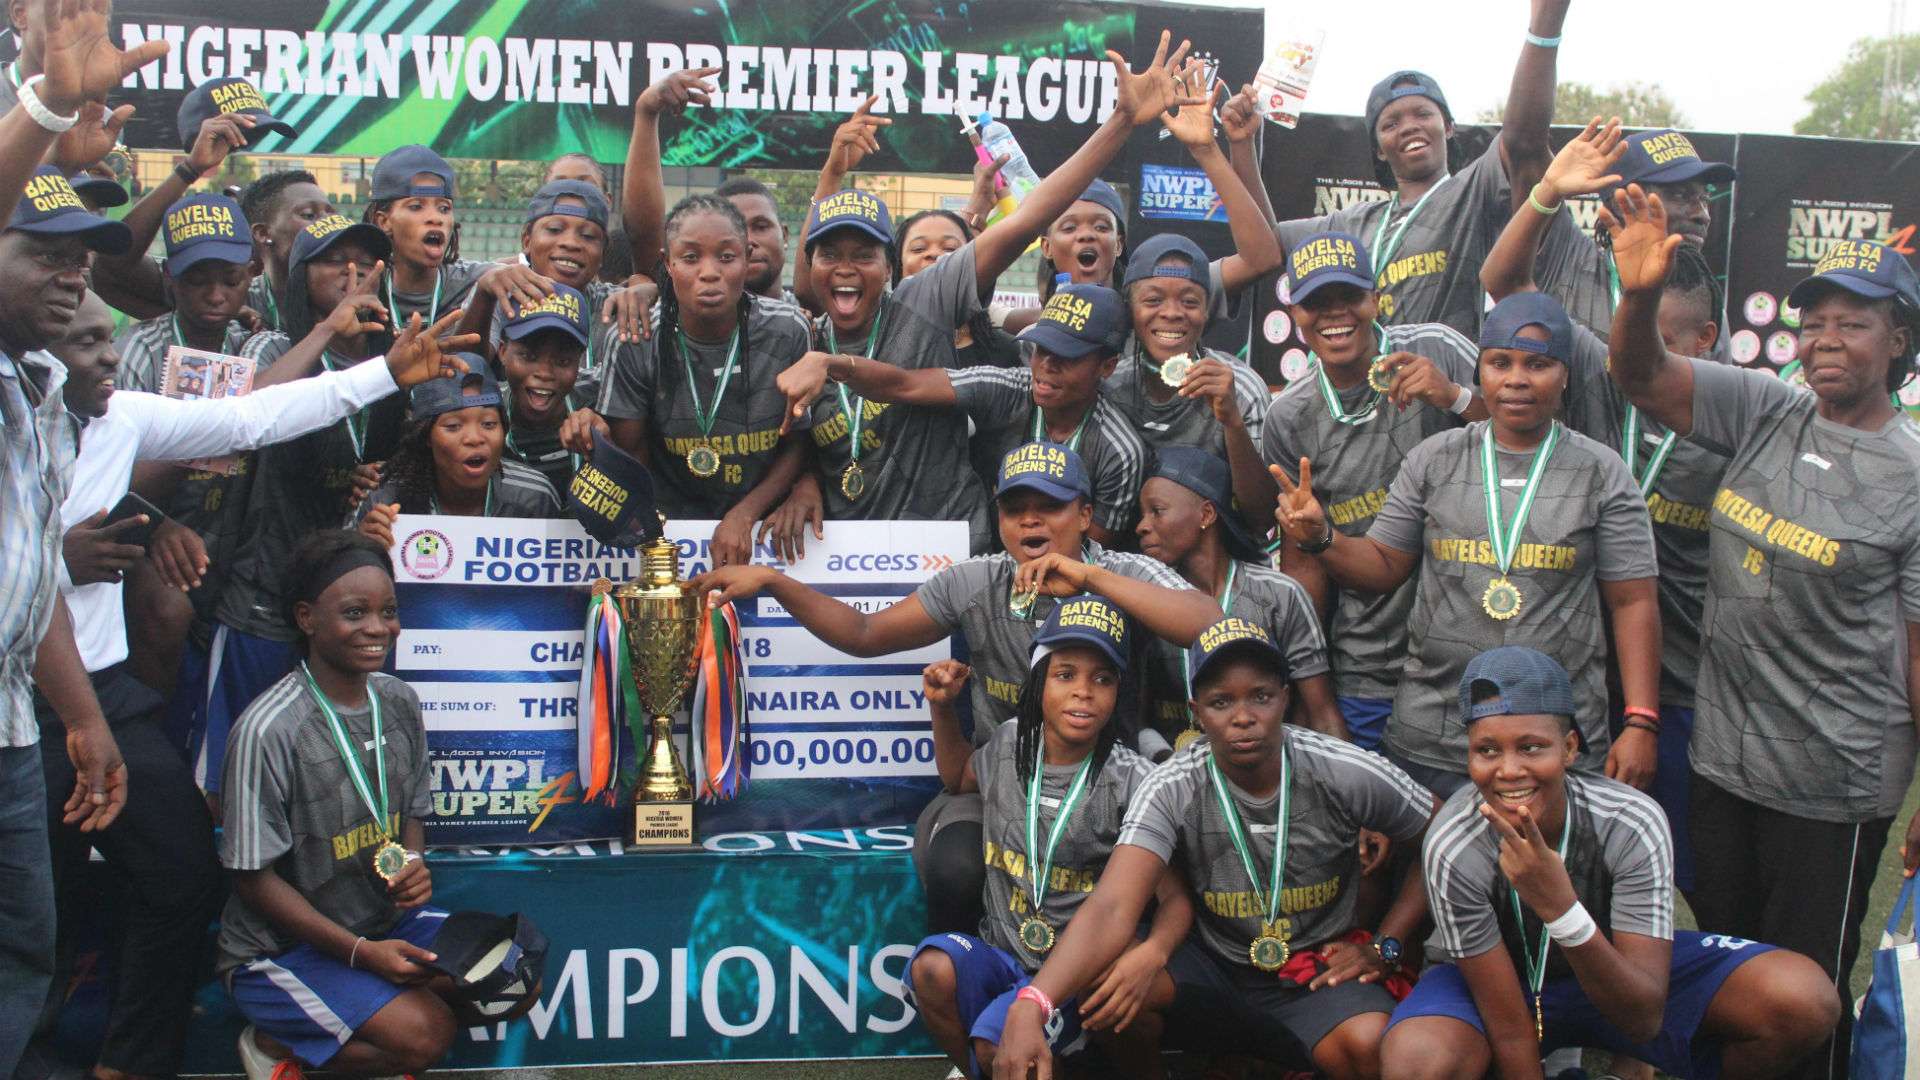 Bayelsa Queens are NWPL Champions